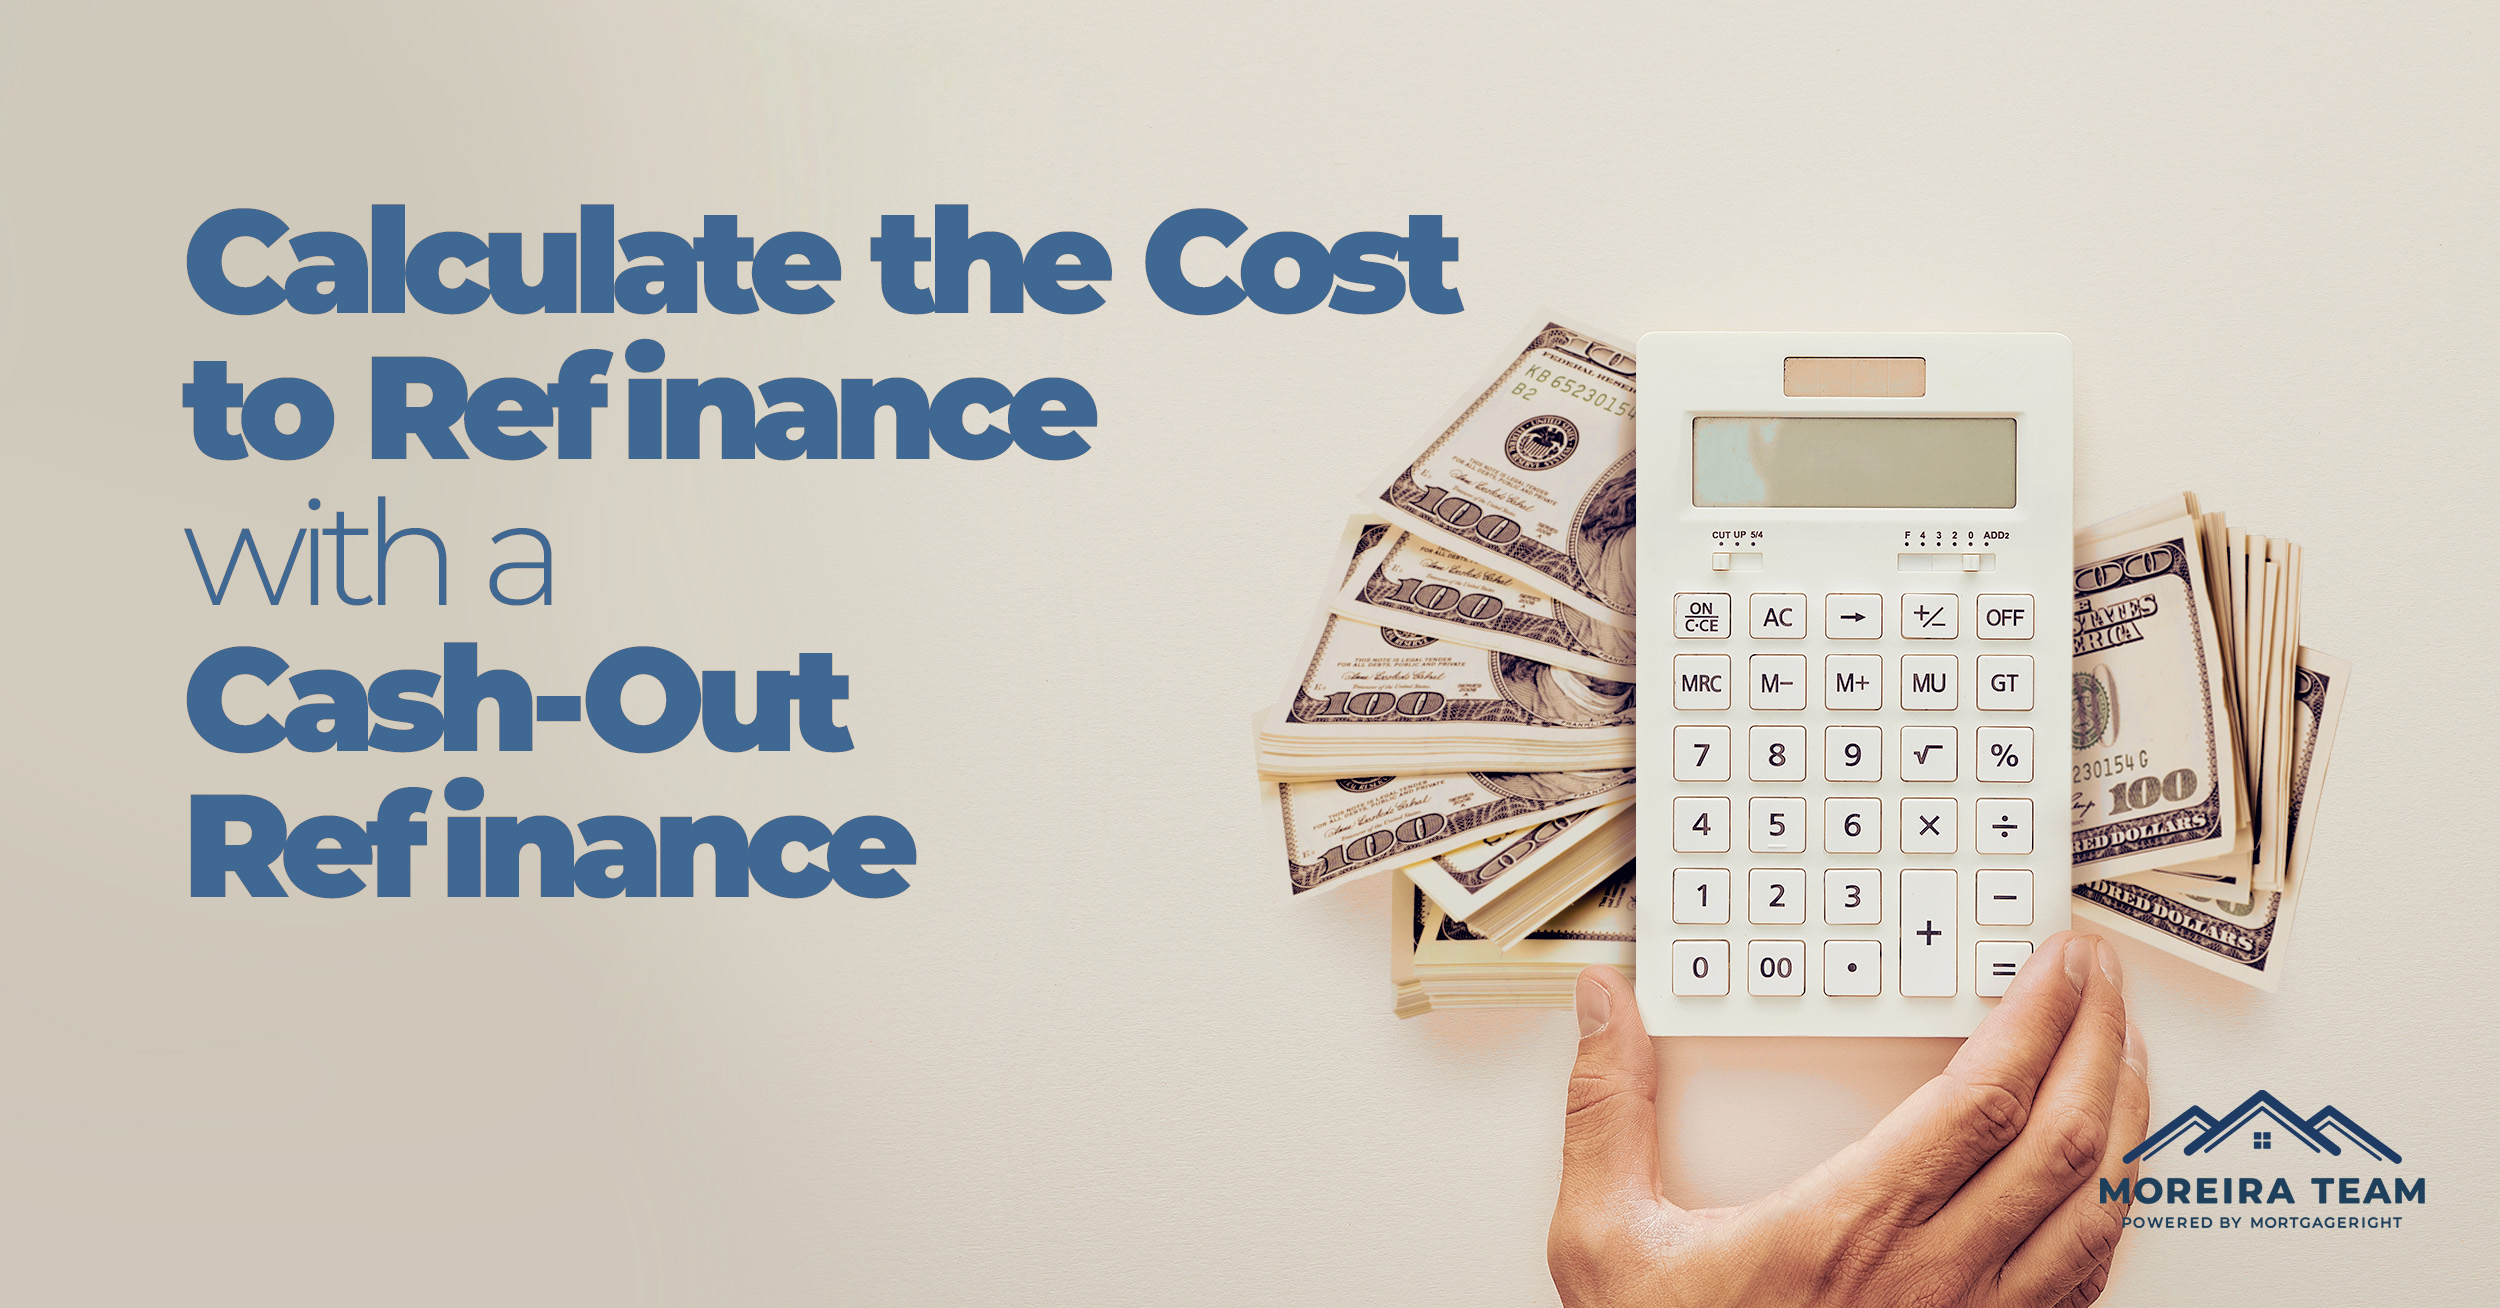 Calculate the Cost to Refinance Mortgage Loans Like Yours With a Cash-Out Refinance